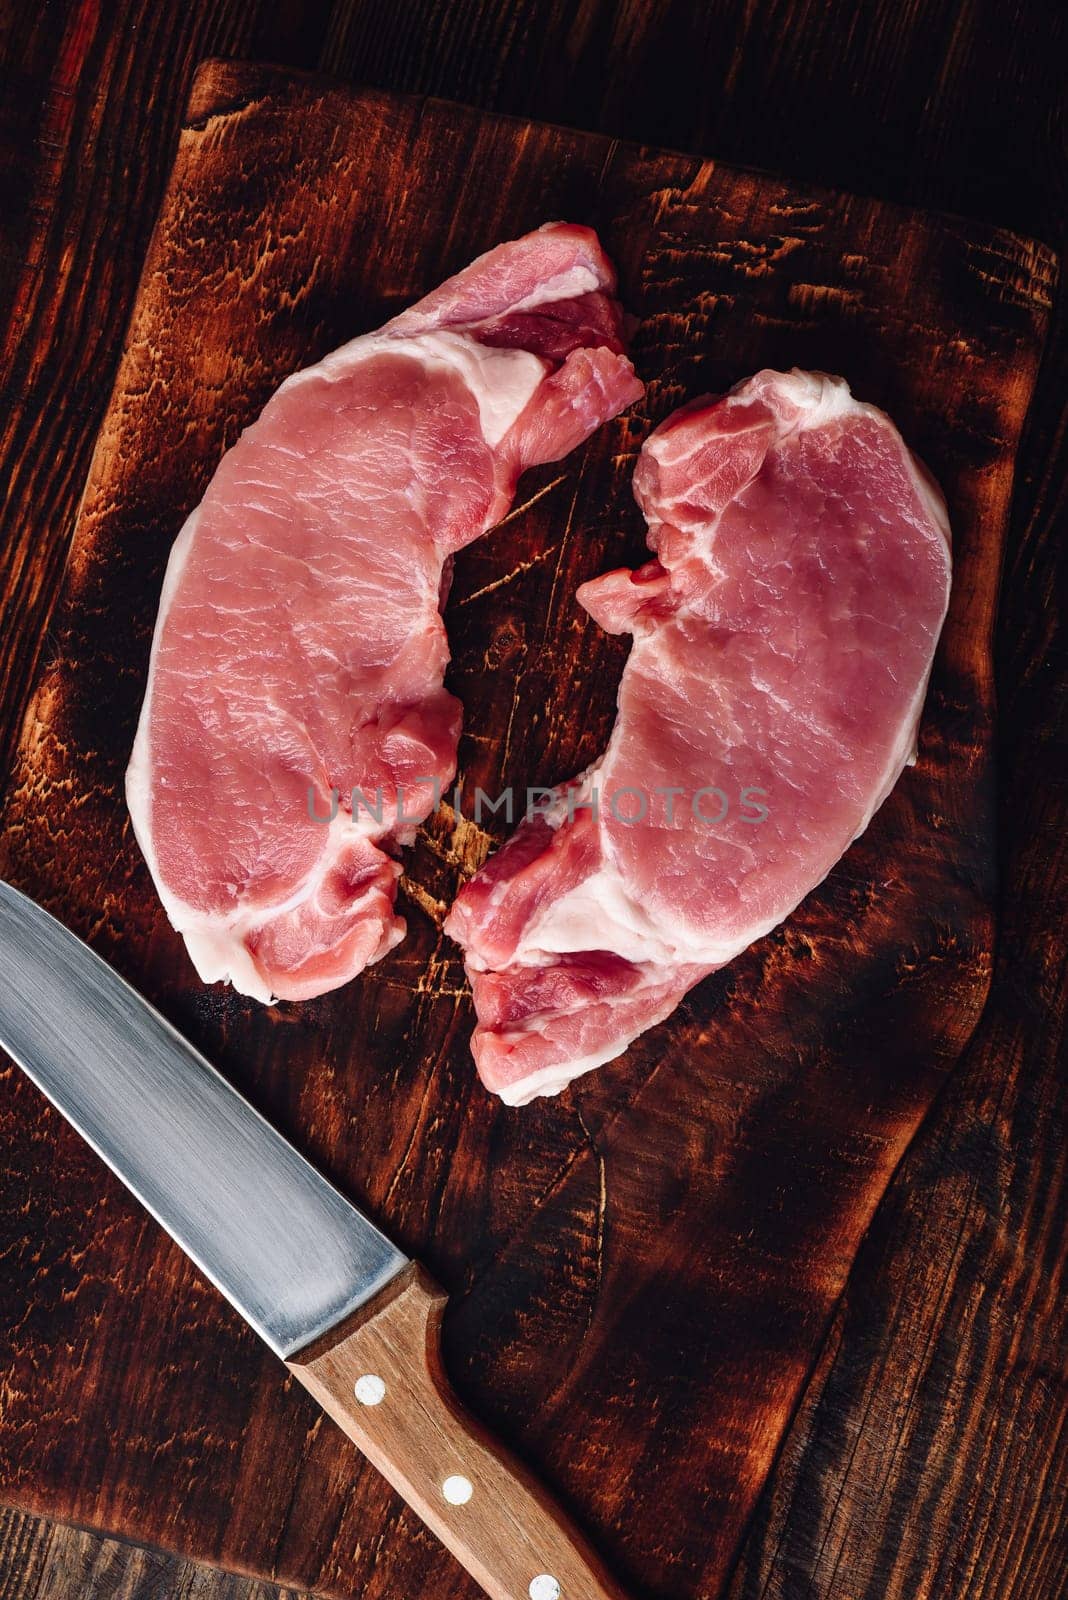 Two pork loin steaks with knife on rustic cutting board